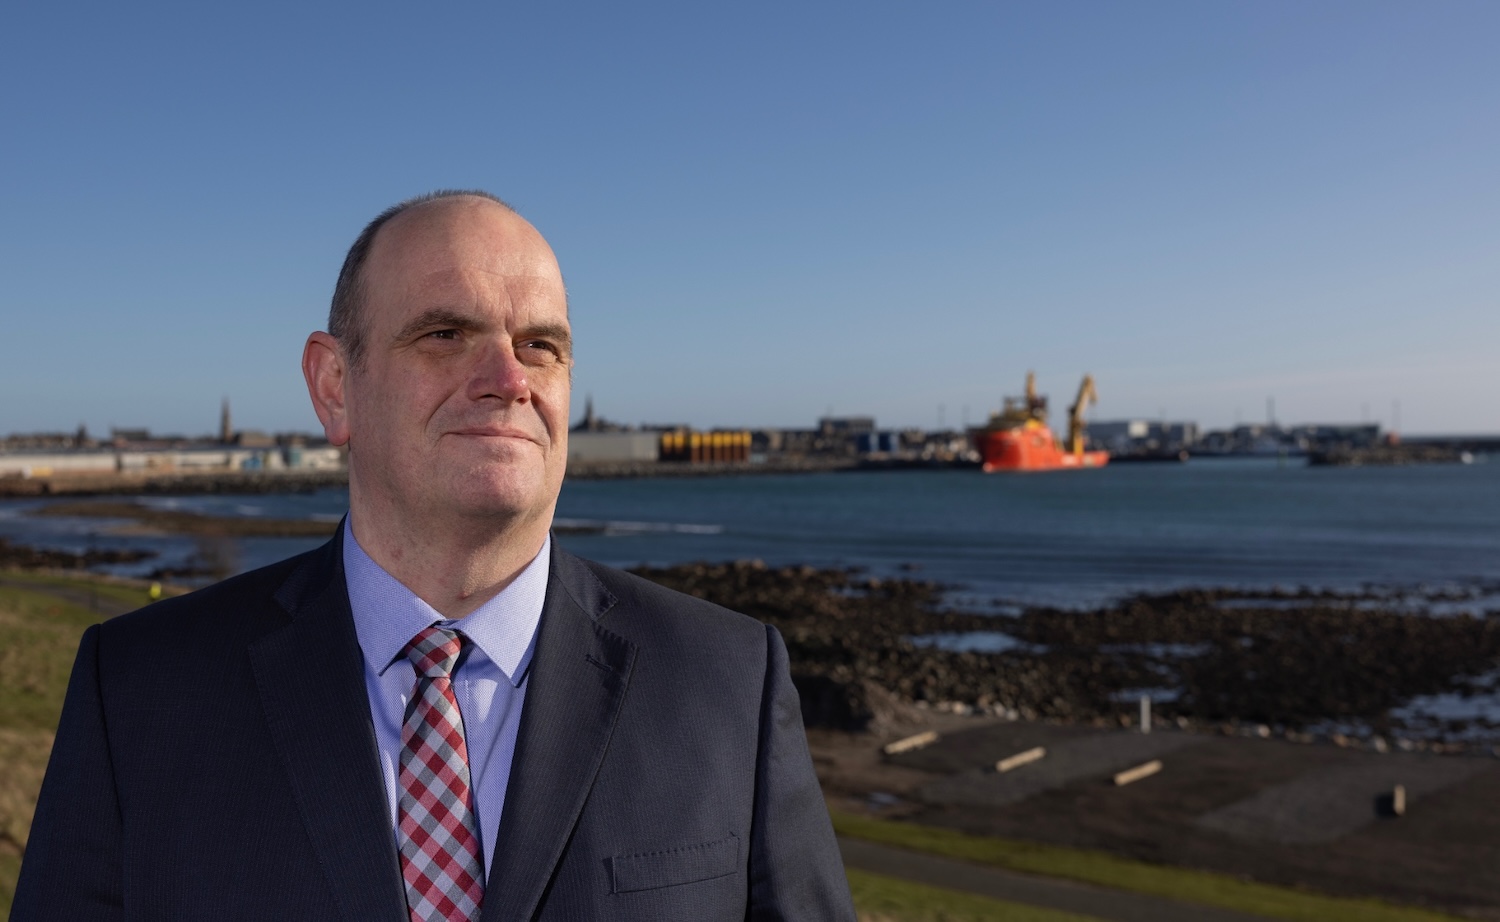 Graeme Reid takes helm at Peterhead Port Authority for pioneering energy transition